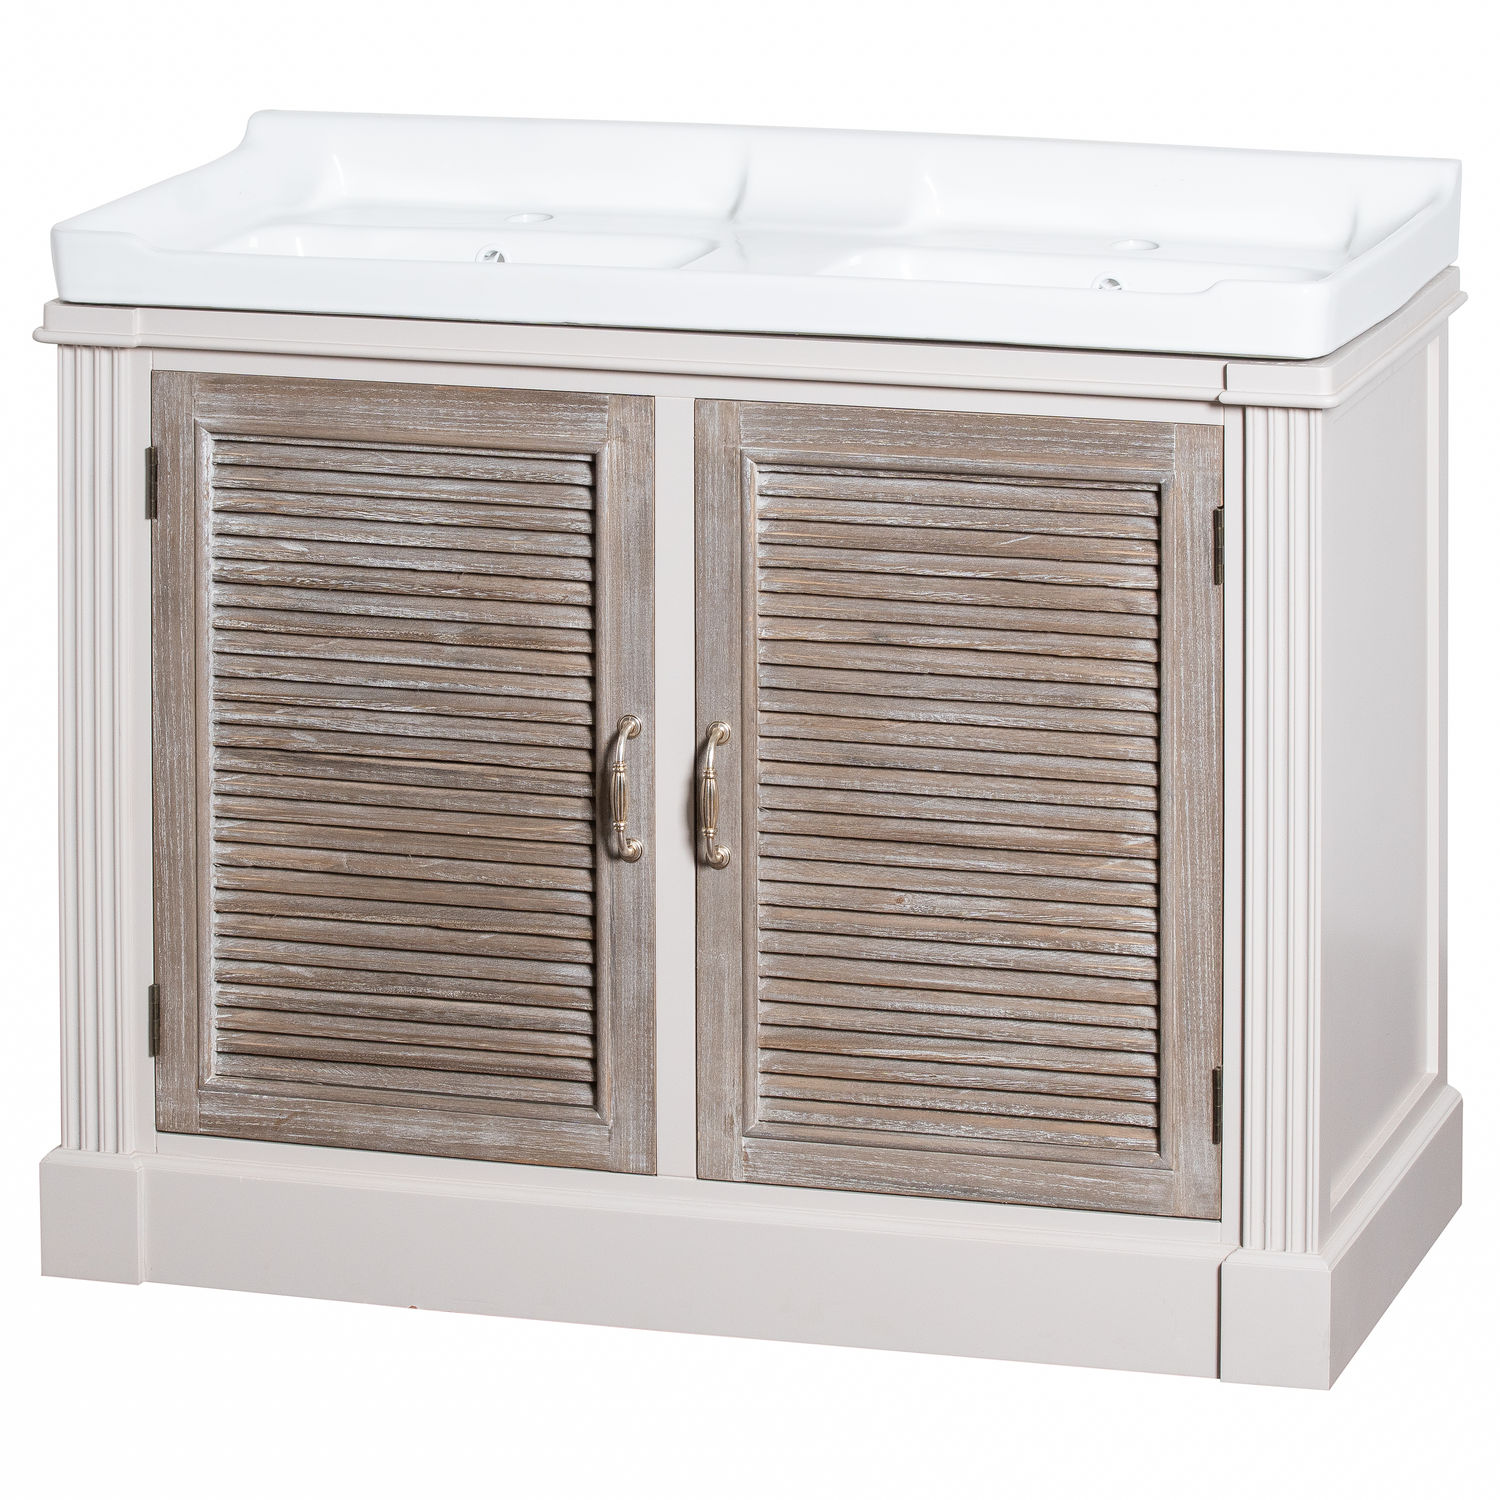 The Liberty Collection Vanity Double Sink Unit